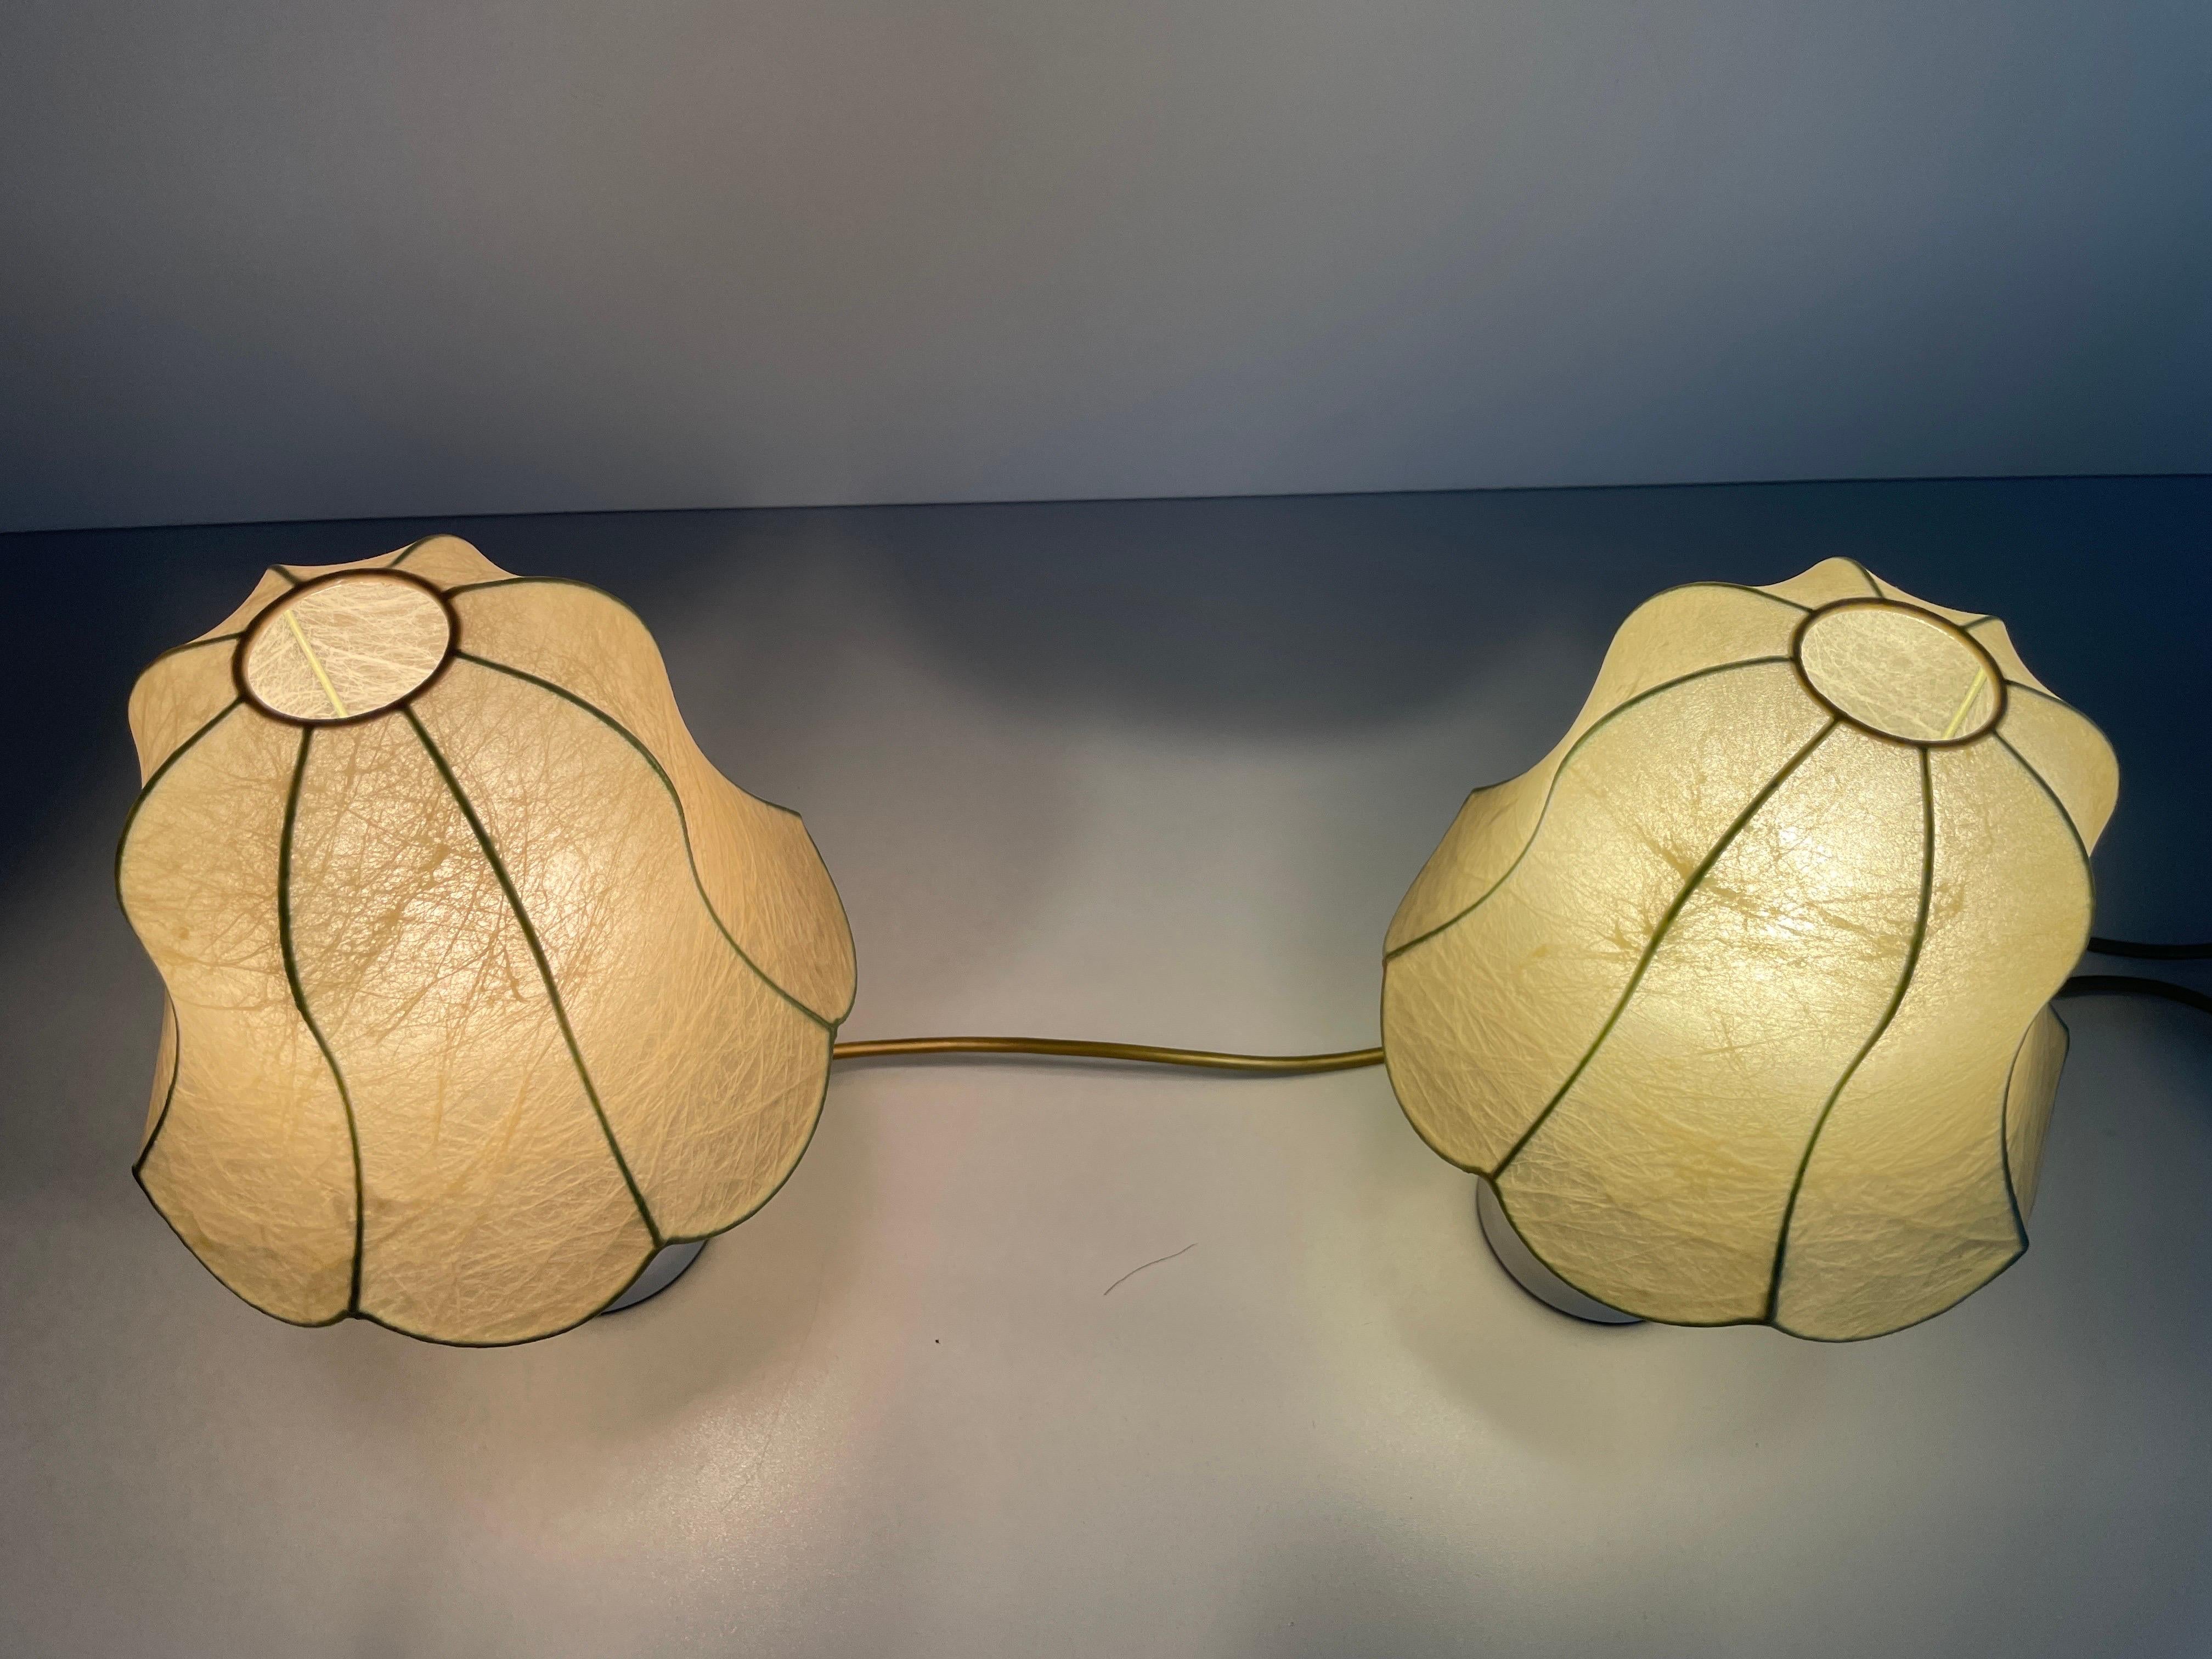 Cocoon Shade Metal Body Pair of Bedside Lamps by GOLDKANT, 1970s, Germany For Sale 9